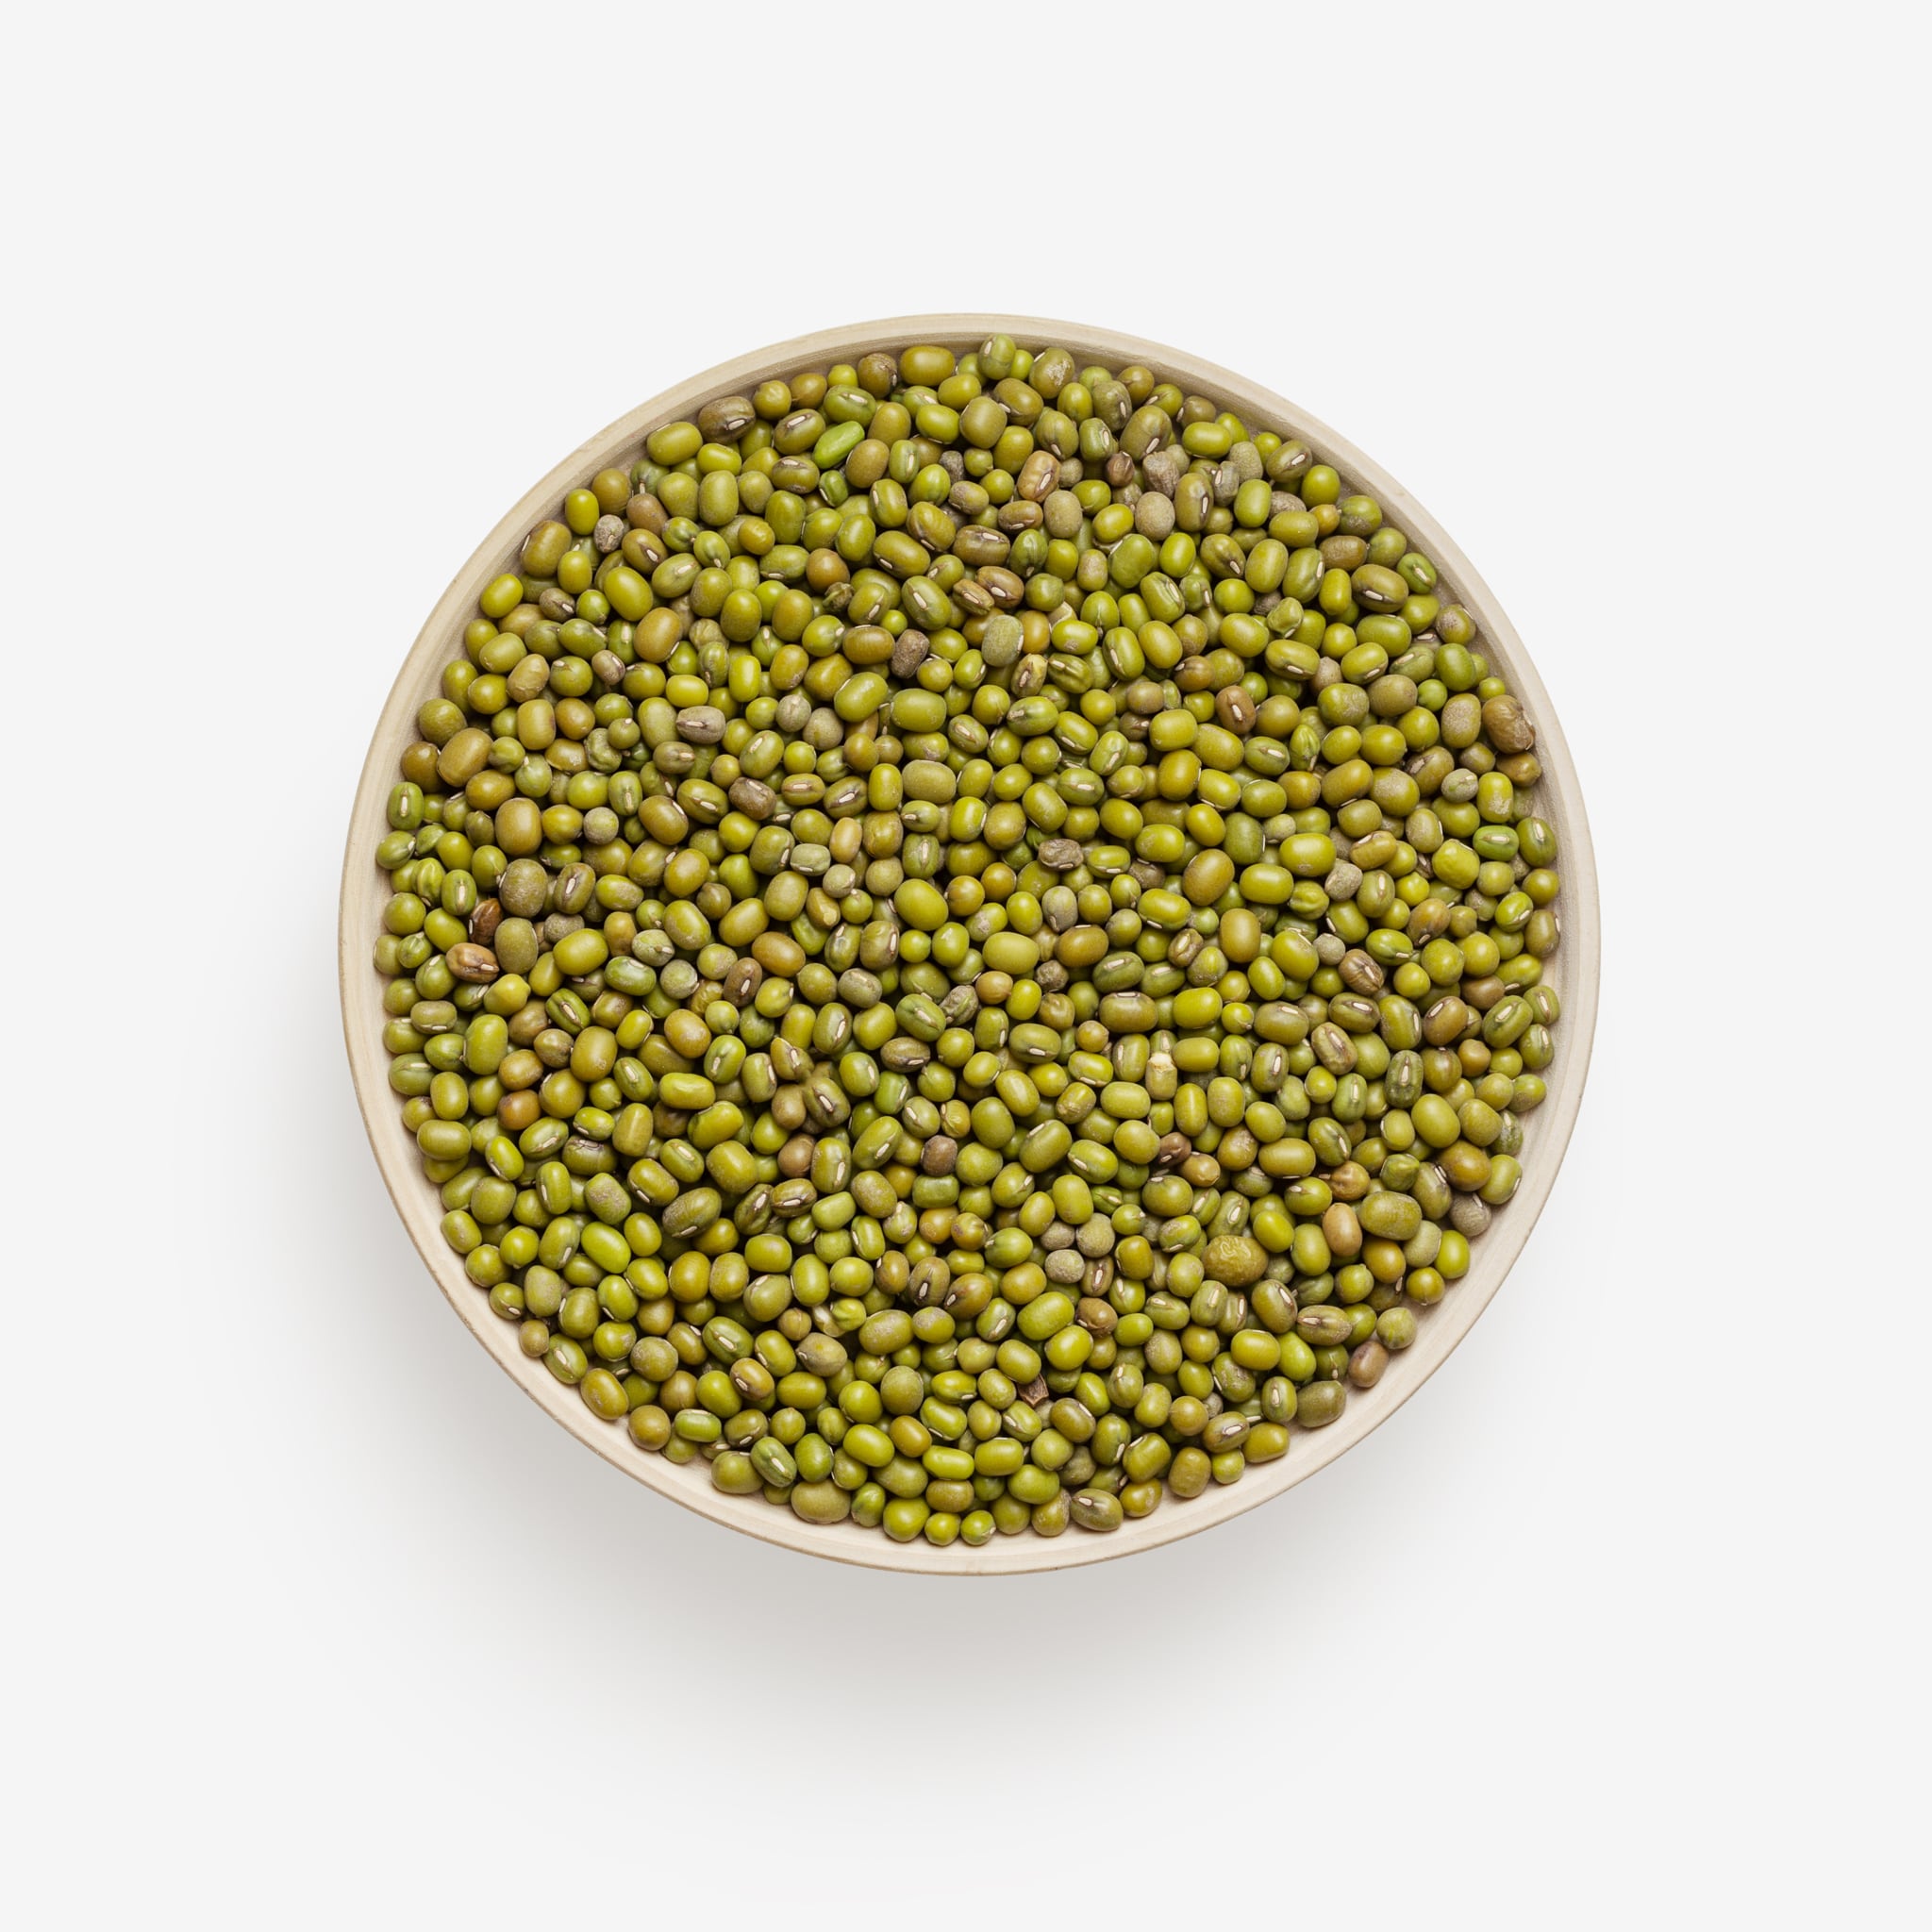 Isolated Grains psd image